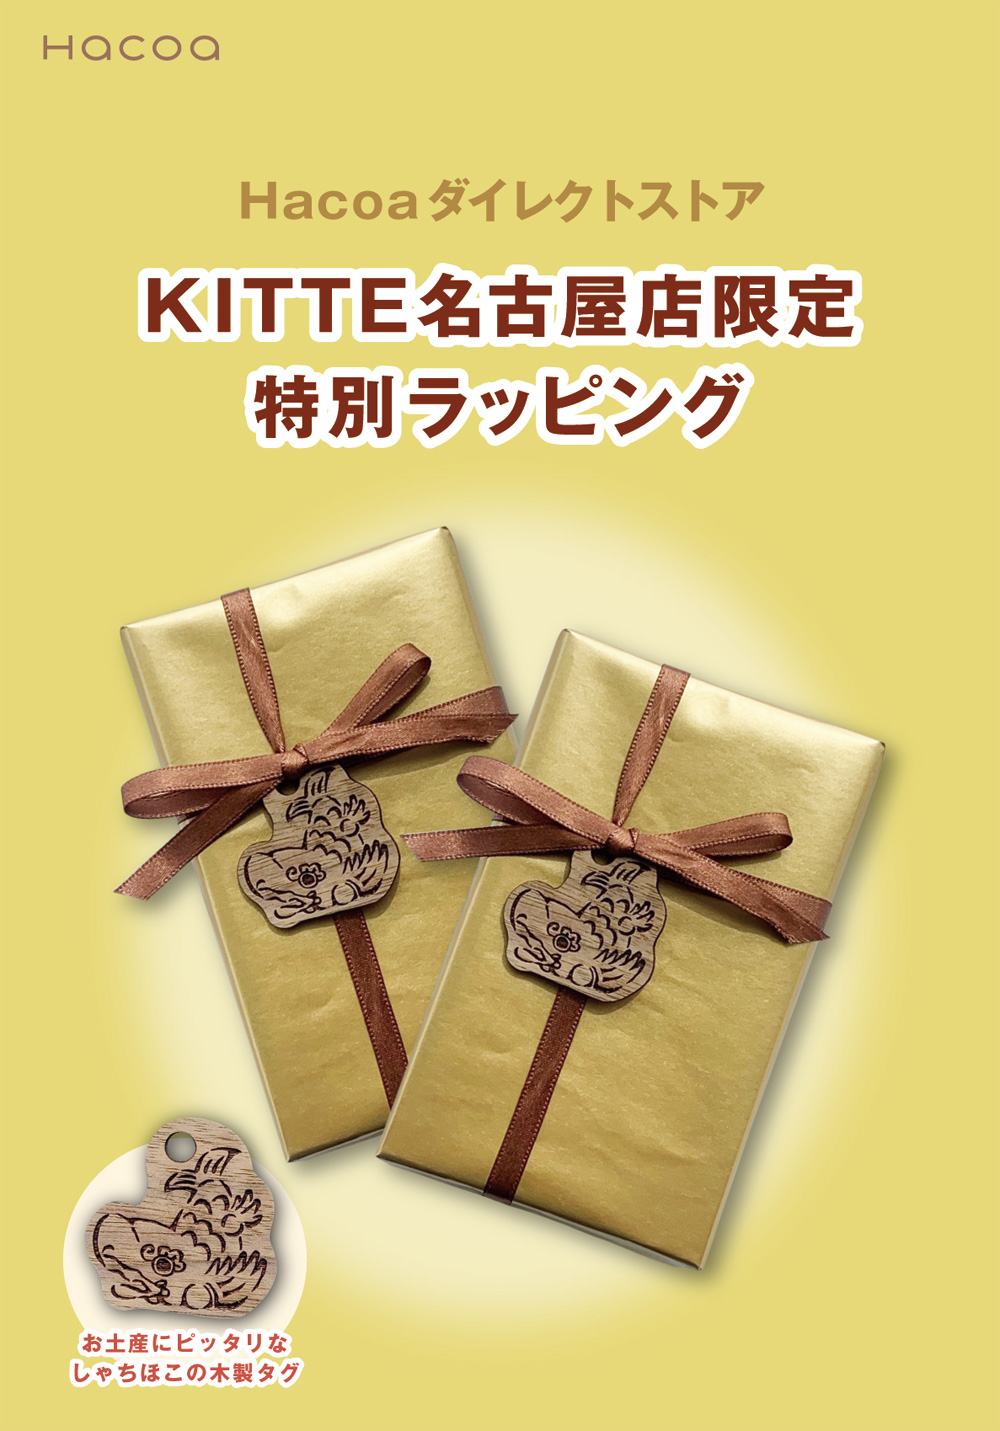 KITTE名古屋店-限定ラッピング